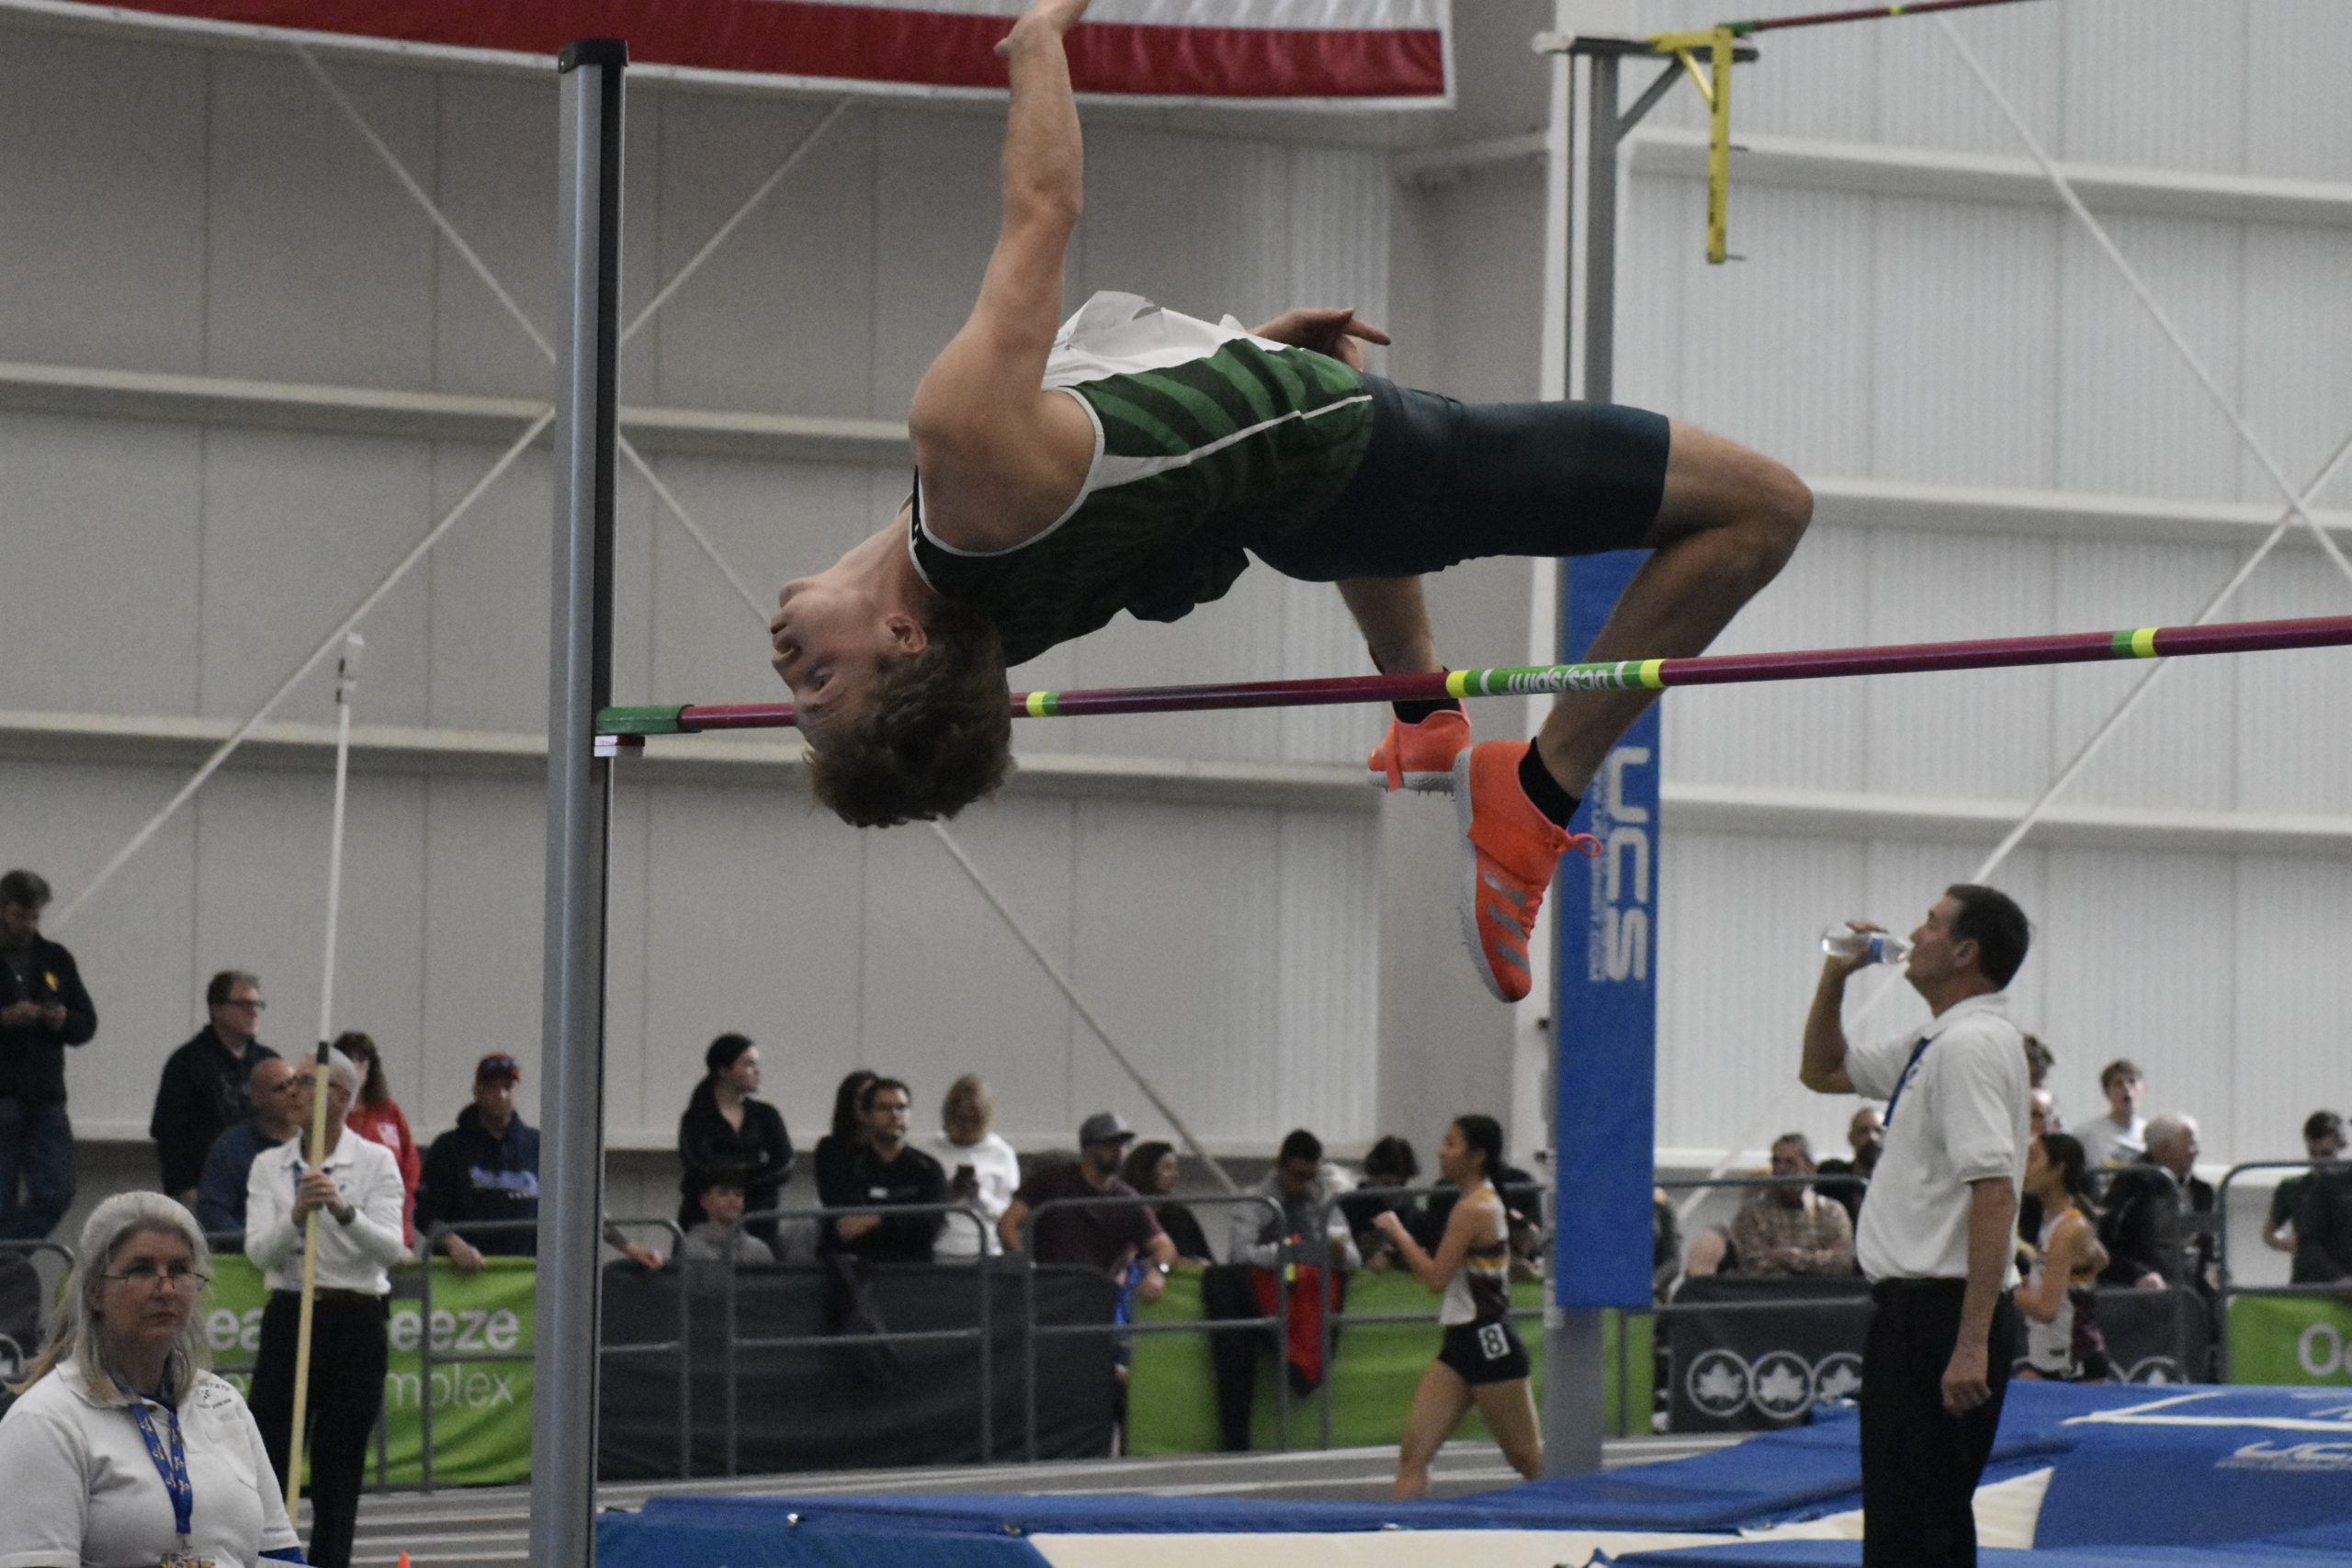 Westhampton Beach senior Jack Meigel cleared 6 feet 6 inches to place third in the state.